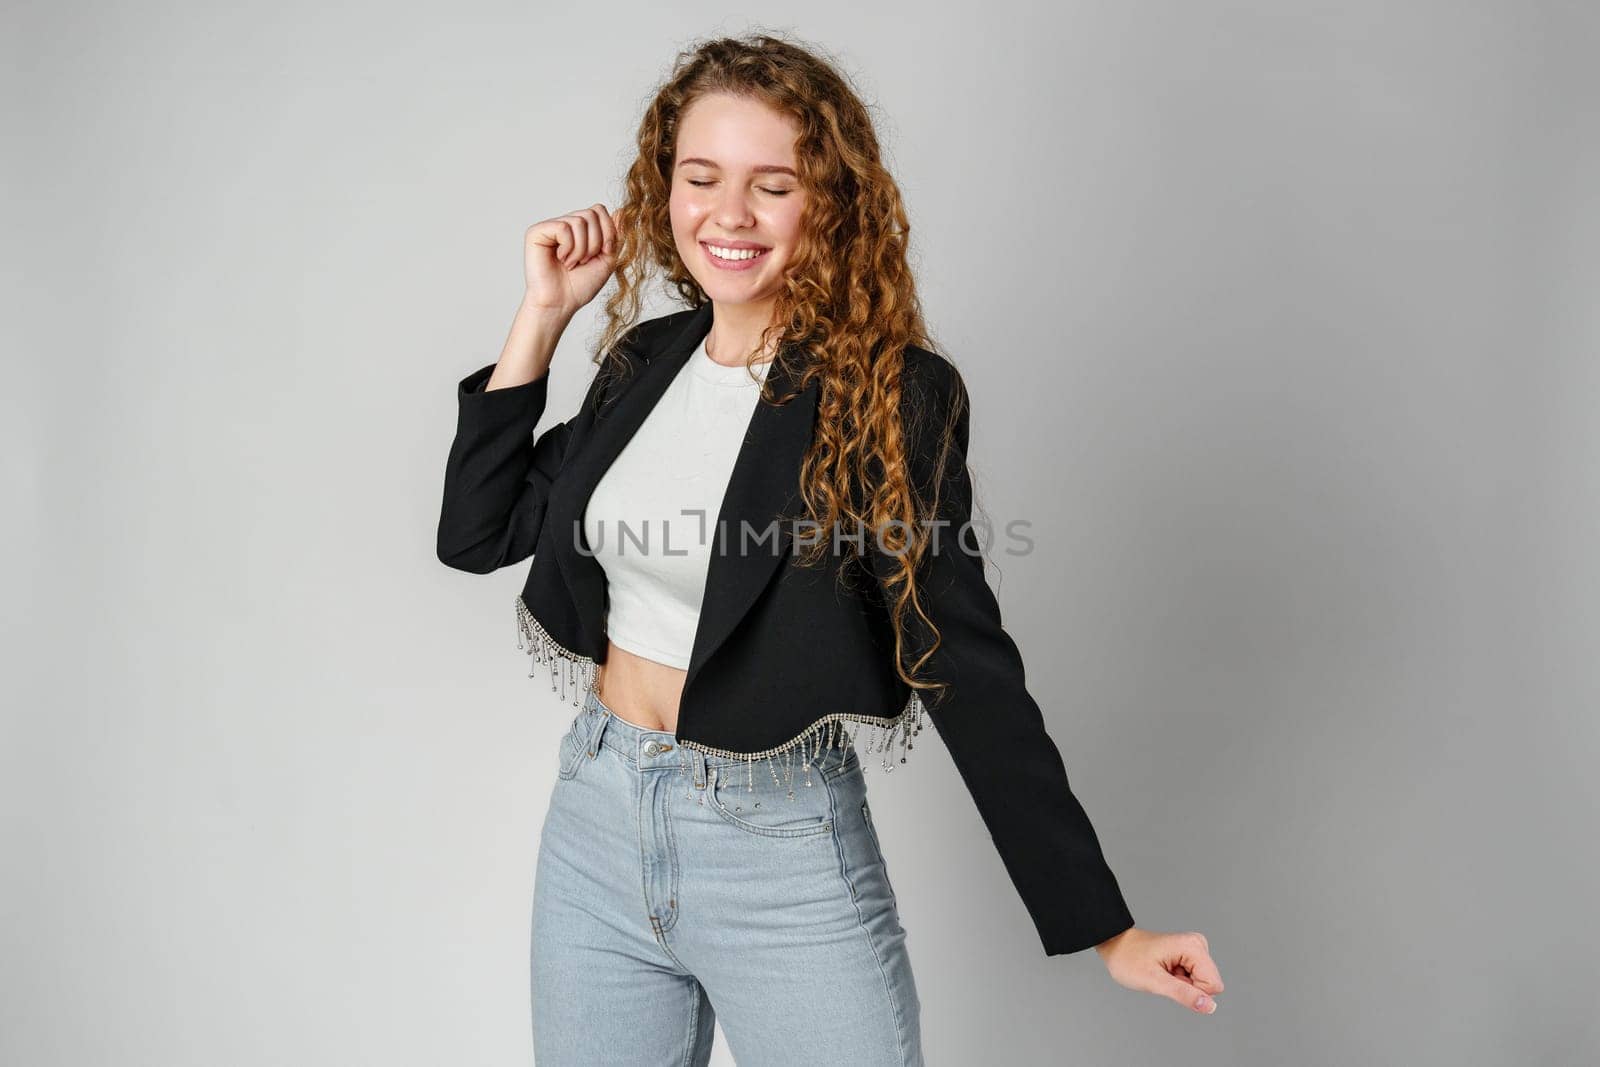 Joyful Young Woman Dancing Alone in Light-Colored Casual Attire Against a Grey Background by Fabrikasimf